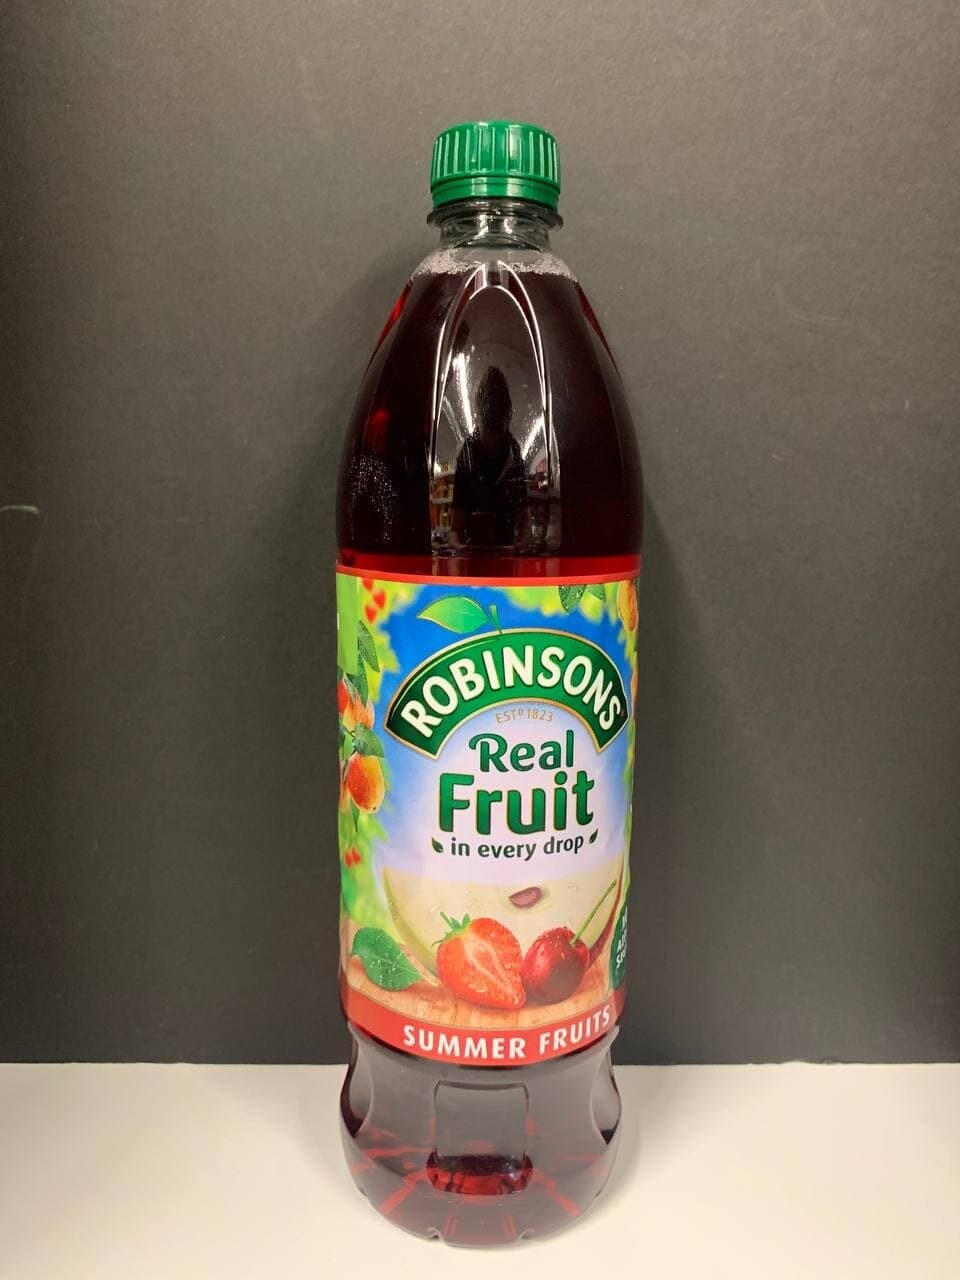 Robinsons Real Fruit Summer Fruits 1000ml